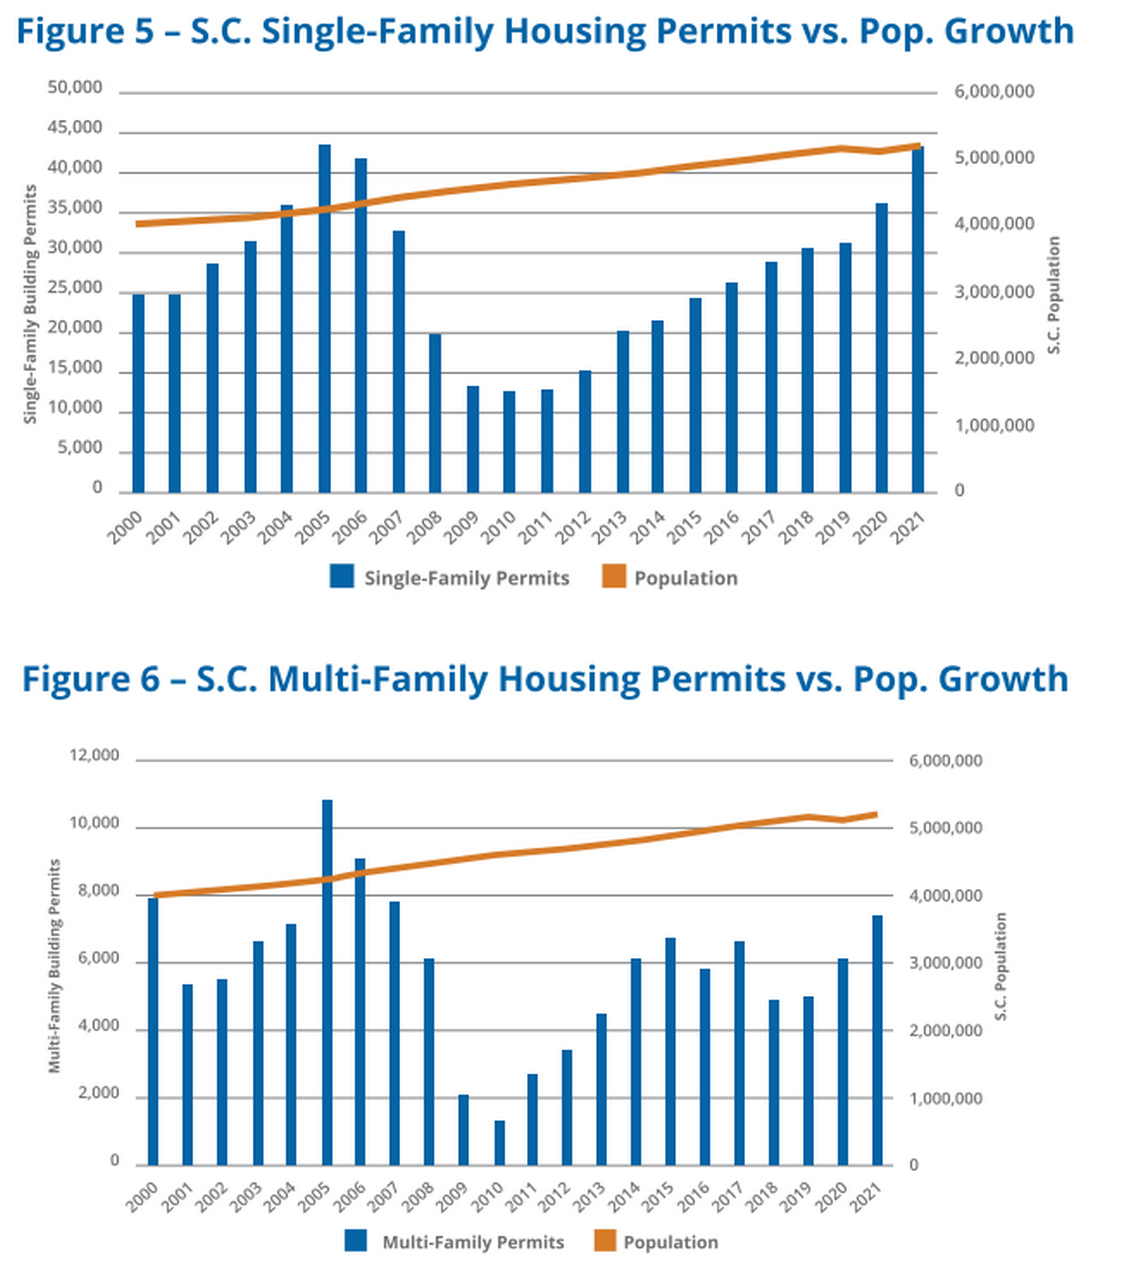 Two charts in the USC Darla Moore School of Business’ 2023 Palmetto State Housing Study show that while the state’s population has steadily increased, housing development has not kept pace, leading to a current development boom. The data for the charts is sourced from the U.S. Census Bureau.